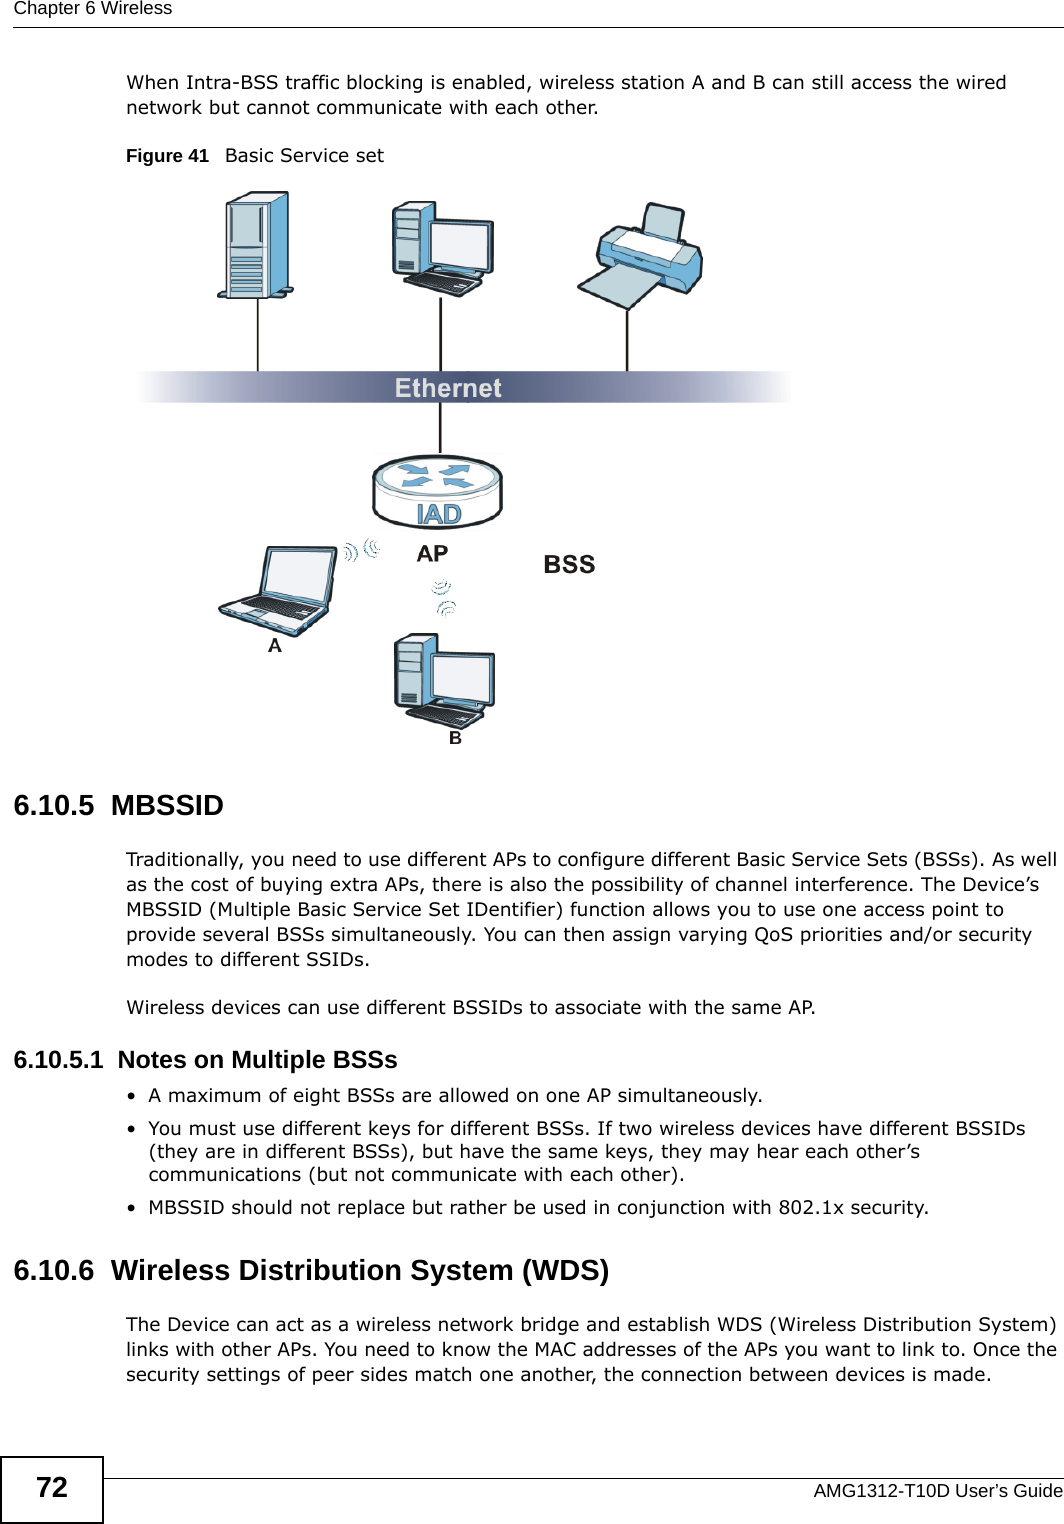 Chapter 6 WirelessAMG1312-T10D User’s Guide72When Intra-BSS traffic blocking is enabled, wireless station A and B can still access the wired network but cannot communicate with each other.Figure 41   Basic Service set6.10.5  MBSSIDTraditionally, you need to use different APs to configure different Basic Service Sets (BSSs). As well as the cost of buying extra APs, there is also the possibility of channel interference. The Device’s MBSSID (Multiple Basic Service Set IDentifier) function allows you to use one access point to provide several BSSs simultaneously. You can then assign varying QoS priorities and/or security modes to different SSIDs.Wireless devices can use different BSSIDs to associate with the same AP.6.10.5.1  Notes on Multiple BSSs• A maximum of eight BSSs are allowed on one AP simultaneously.• You must use different keys for different BSSs. If two wireless devices have different BSSIDs (they are in different BSSs), but have the same keys, they may hear each other’s communications (but not communicate with each other).• MBSSID should not replace but rather be used in conjunction with 802.1x security.6.10.6  Wireless Distribution System (WDS)The Device can act as a wireless network bridge and establish WDS (Wireless Distribution System) links with other APs. You need to know the MAC addresses of the APs you want to link to. Once the security settings of peer sides match one another, the connection between devices is made.